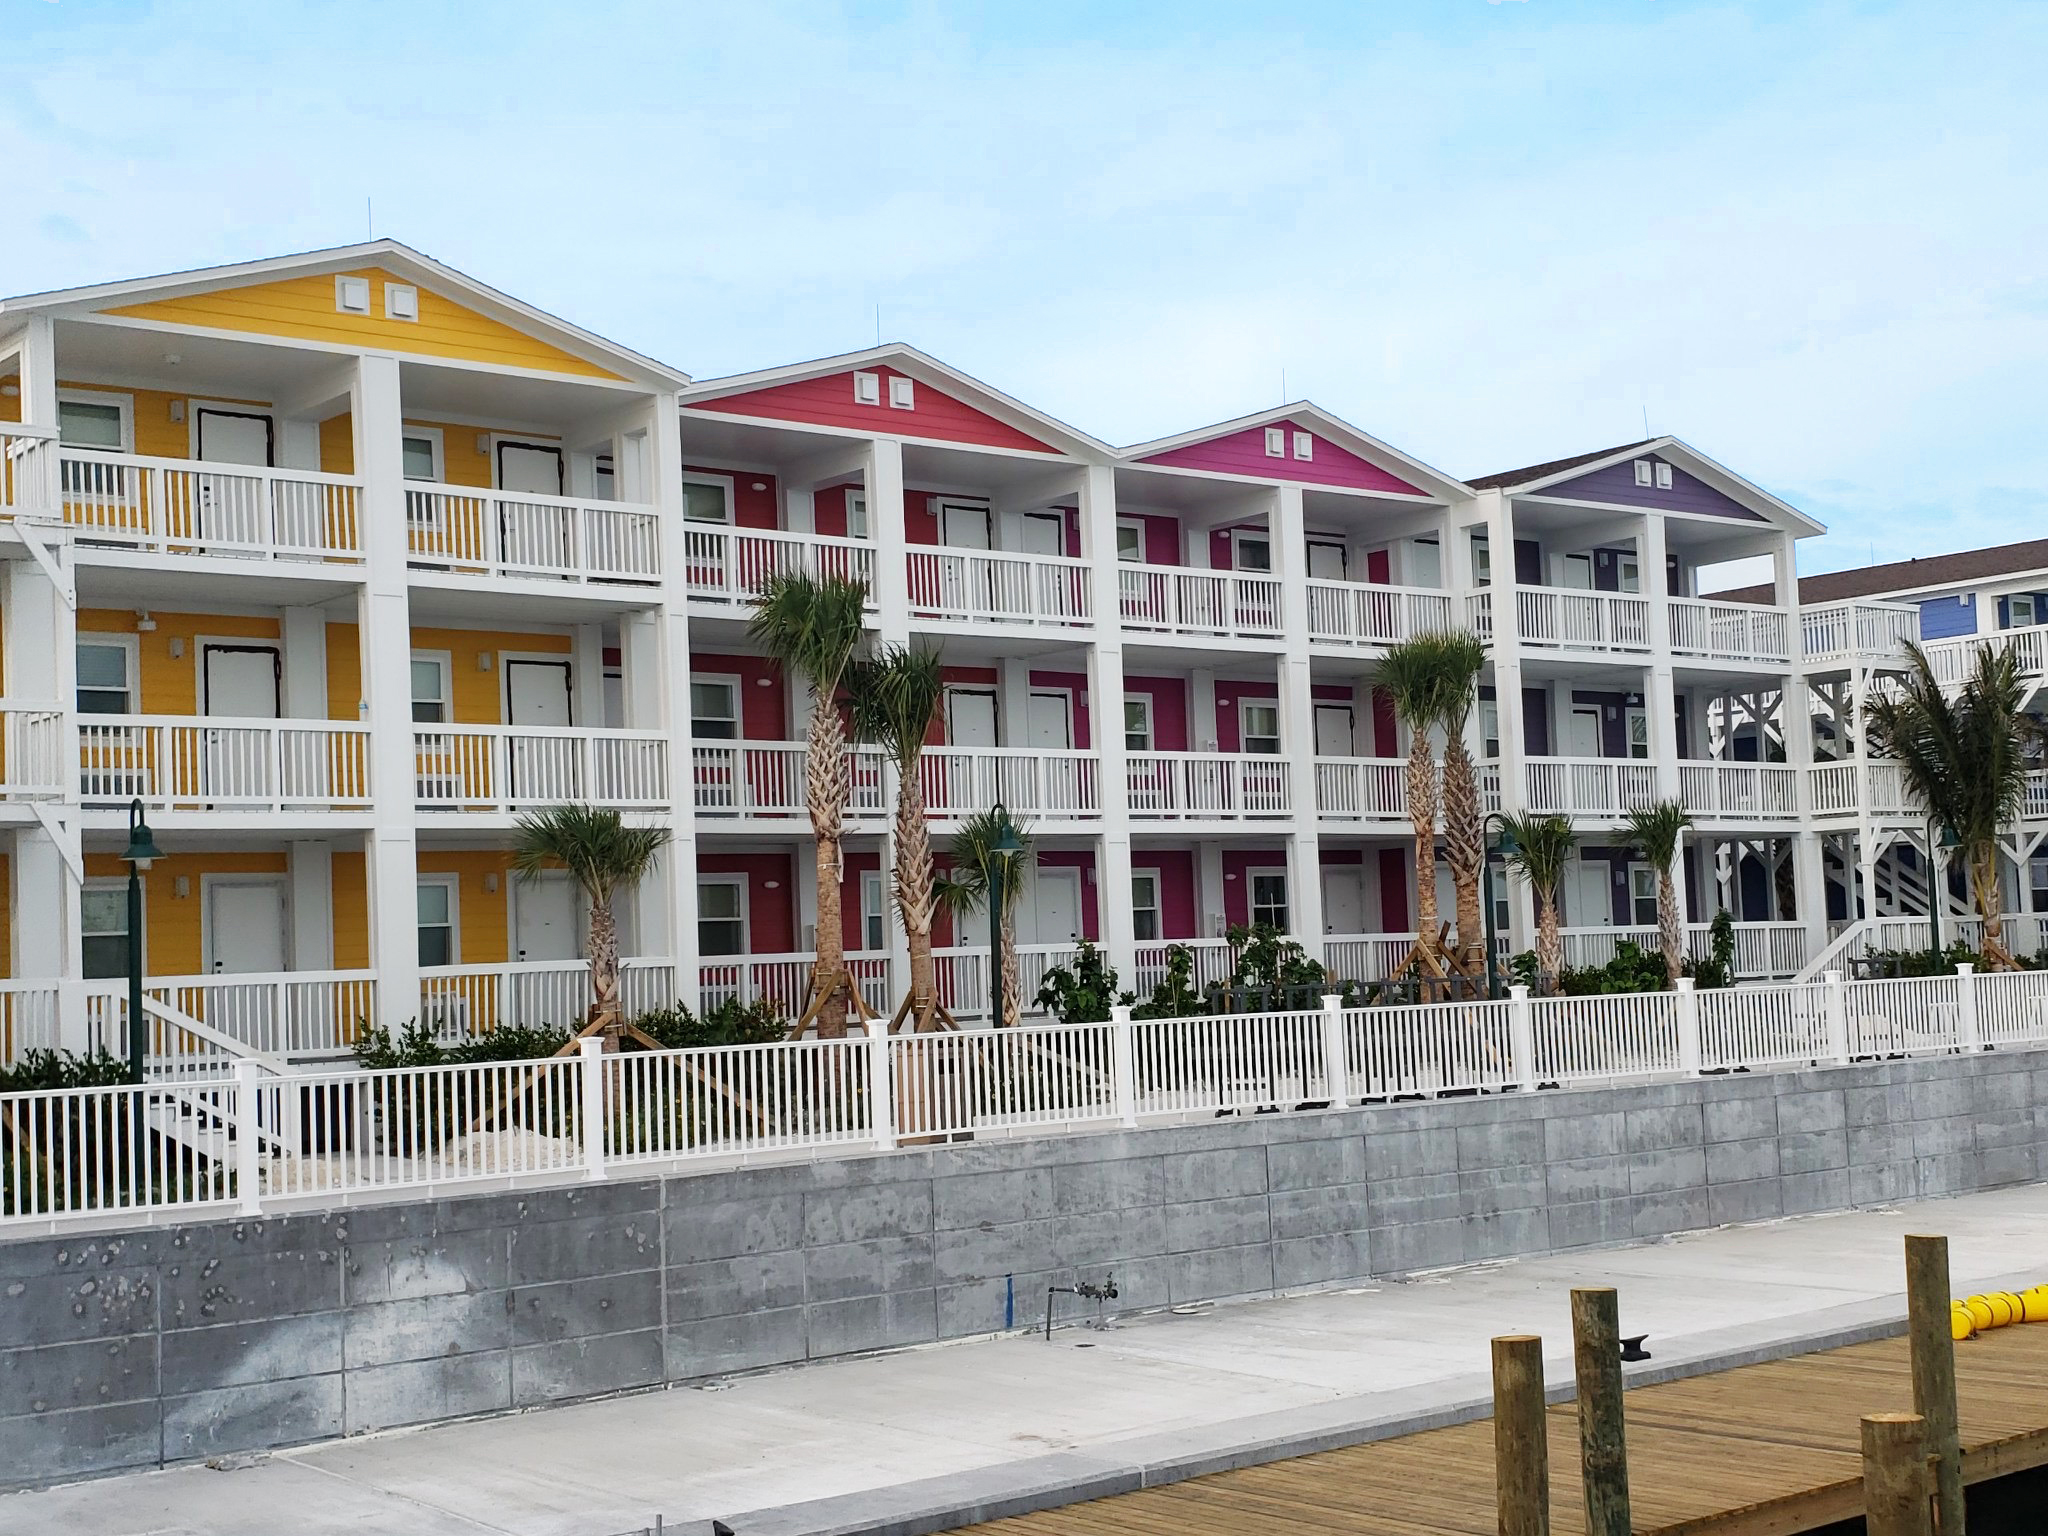 Modular Workforce Housing For The Island of Ocean Cay